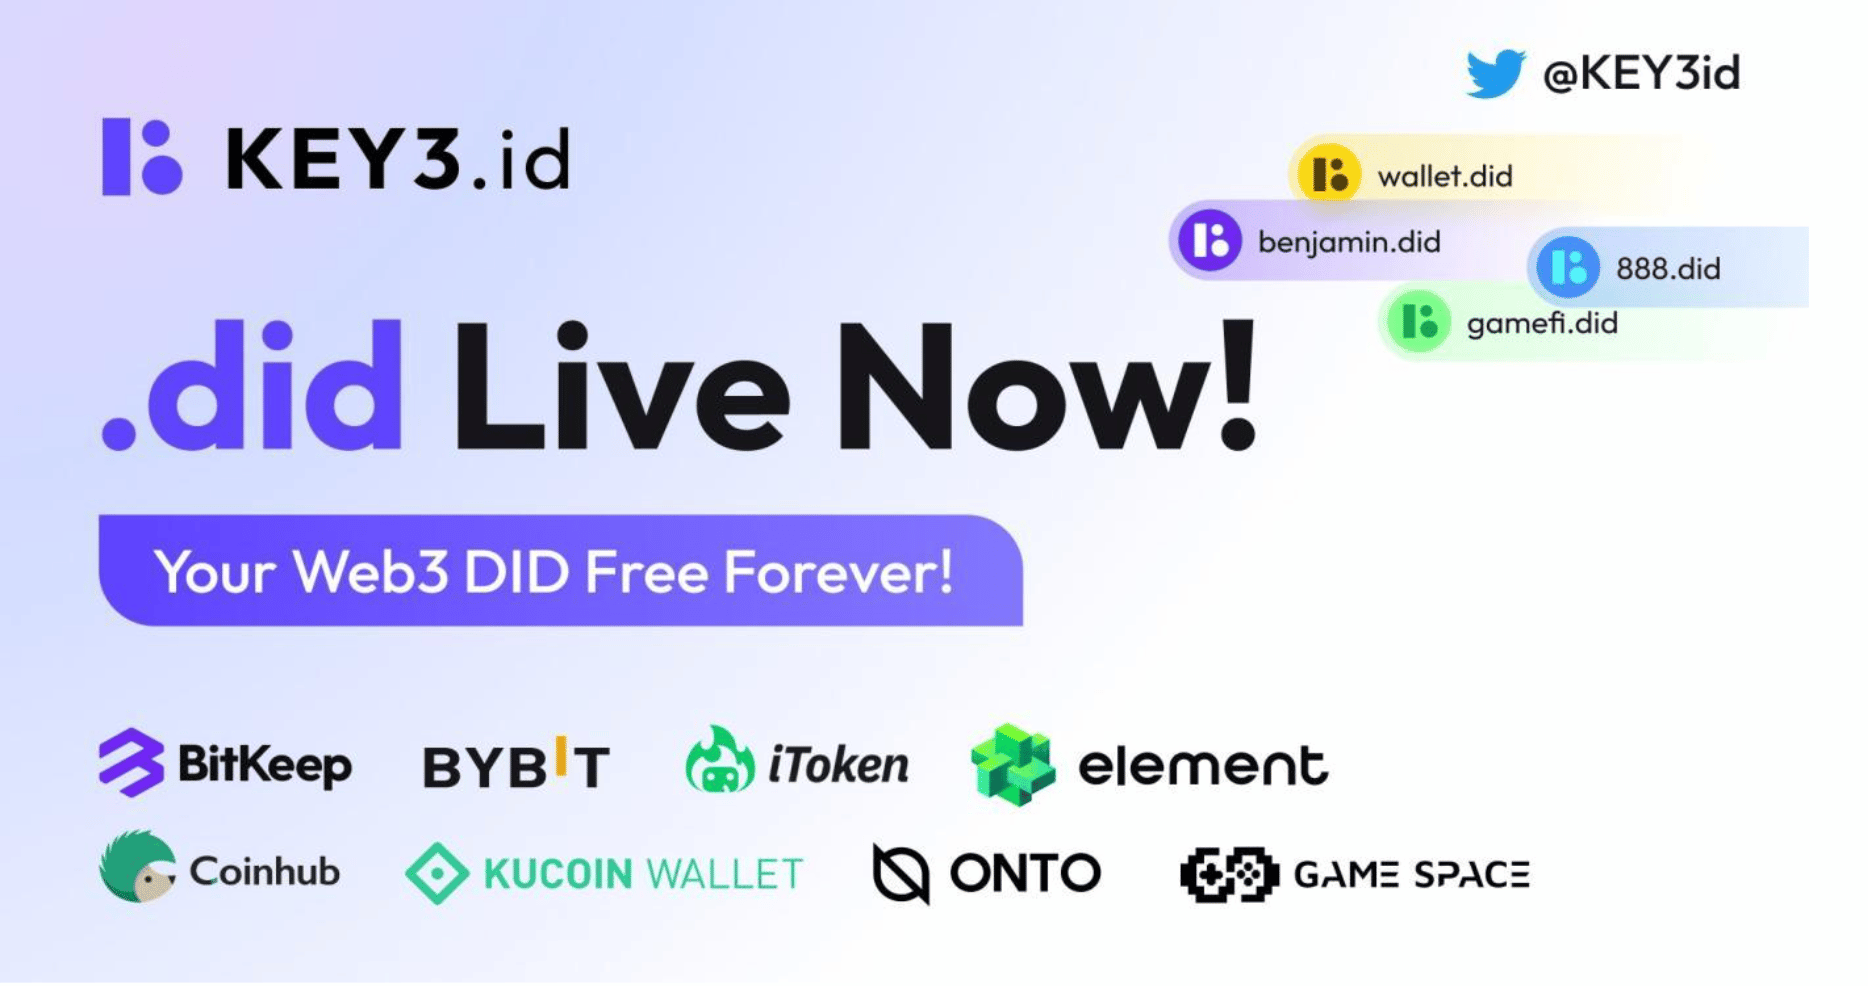 KEY3.id now live! Partnership with Bitkeep and 8 other wallets, over 16,000 early bird participants